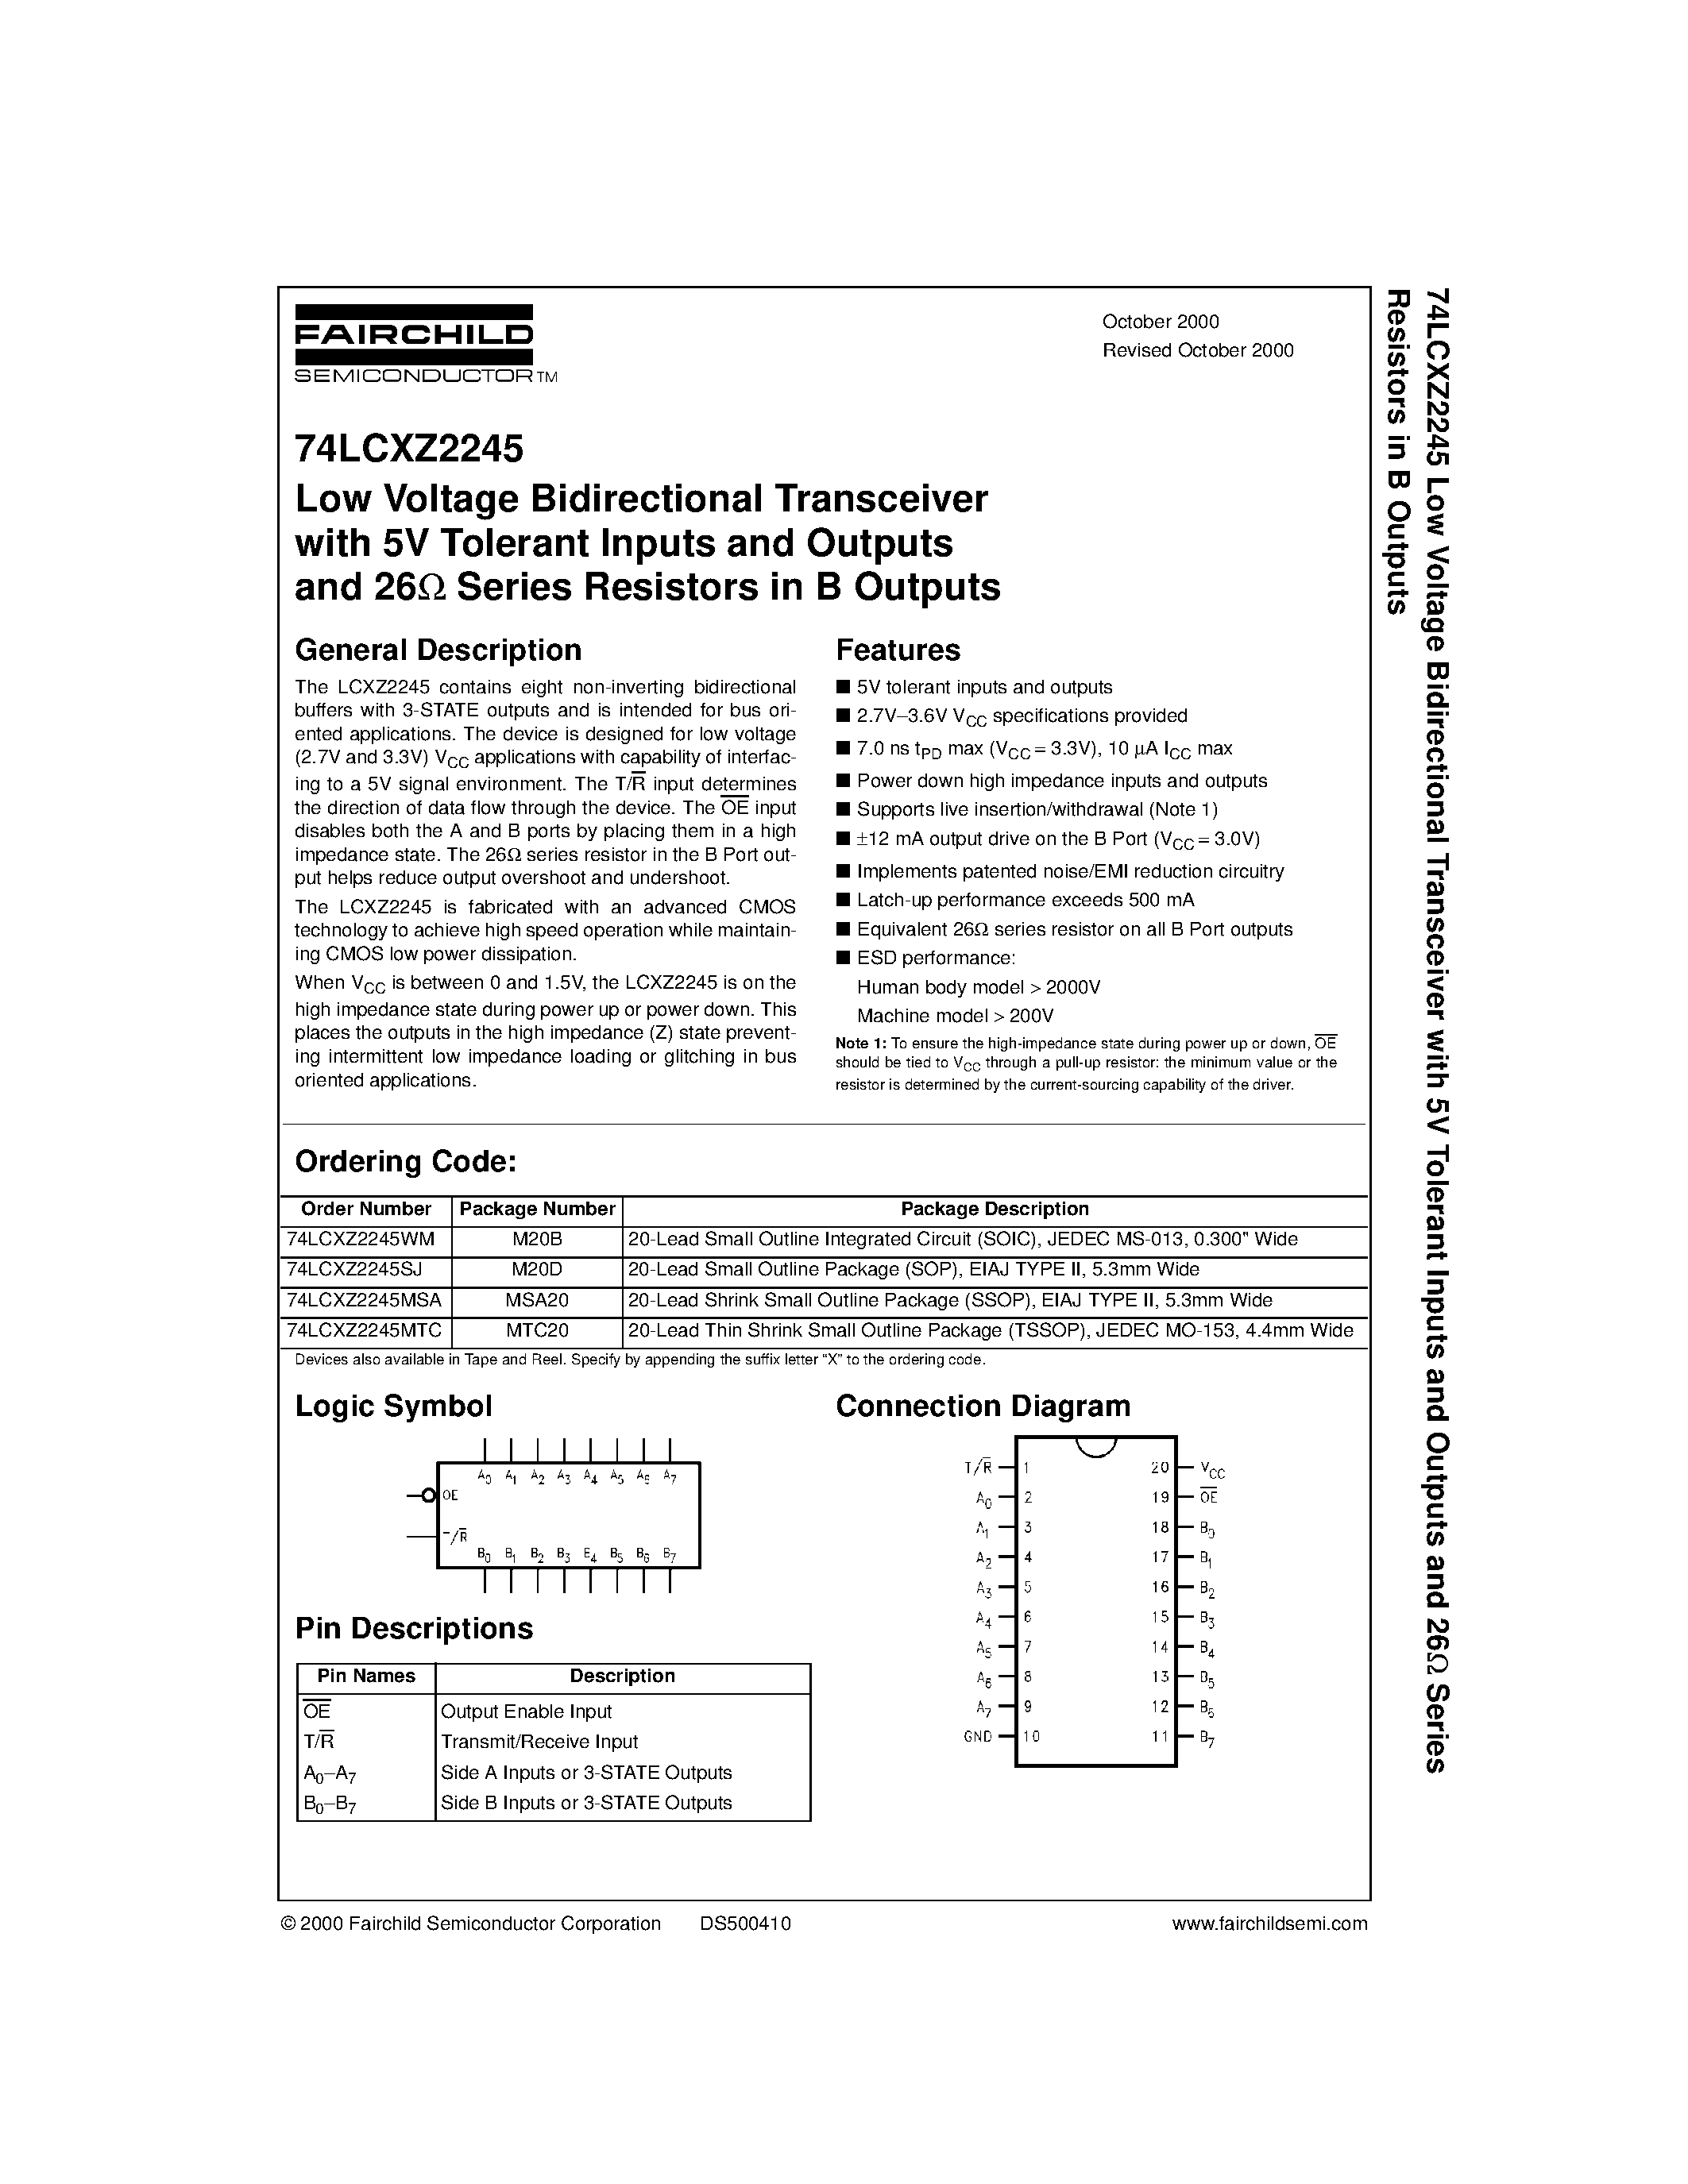 Datasheet 74LCXZ2245WM - Low Voltage Bidirectional Transceiver with 5V Tolerant Inputs and Outputs and 26 Series Resistors in B Outputs page 1